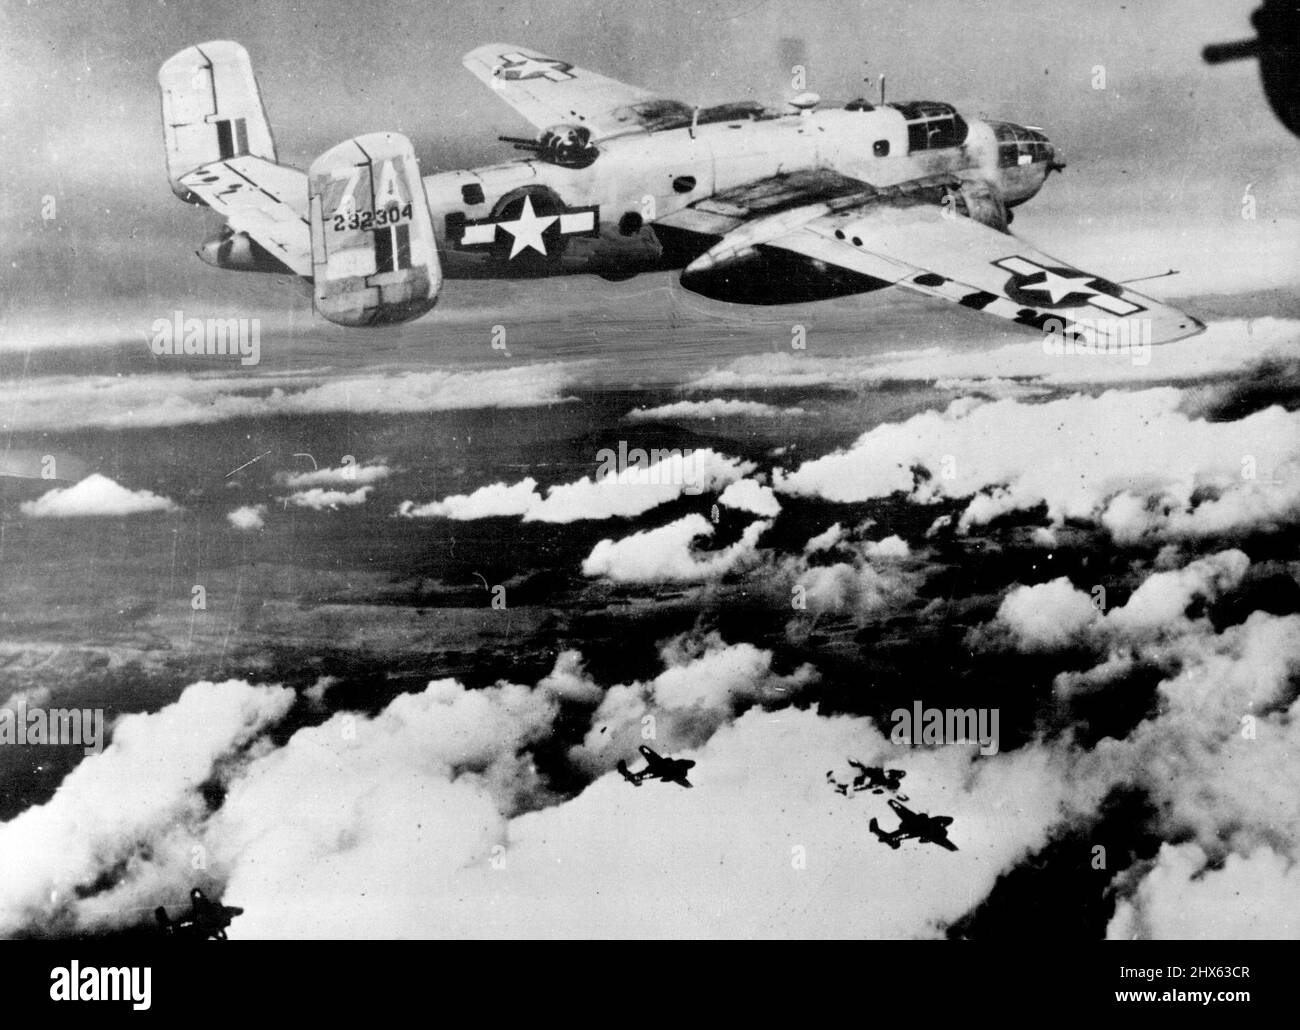 U.S. Bombers Blast German Installations In Yugoslavia. Soaring high above scattered clouds, a squadron of B-25 Mitchell medium bombers of the Twelfth U.S. Amy Air Force blasts the port of Sibenik, Yugoslavia, damaging the German-held airfield, railway yards and supply depots. Raids by Allied pianos over German supply bases and communication lines are helping Yugoslav patriots in their fight against the invader. February 14, 1944. Stock Photo